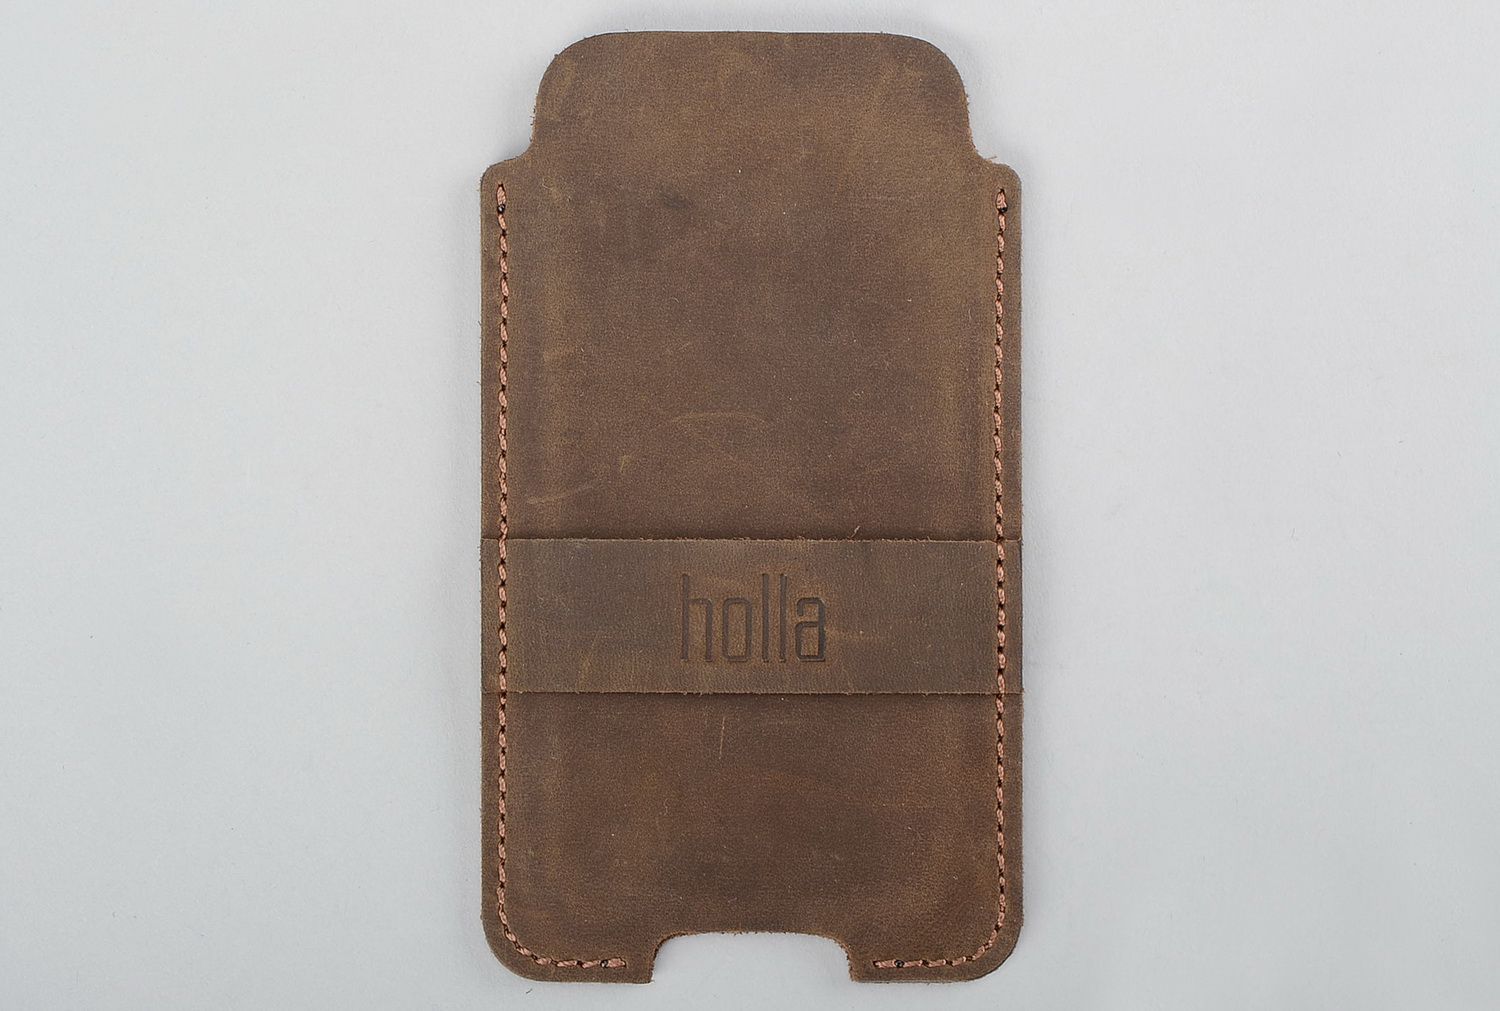 Sleeve for iPhone 4S/5S made of natural leather photo 1